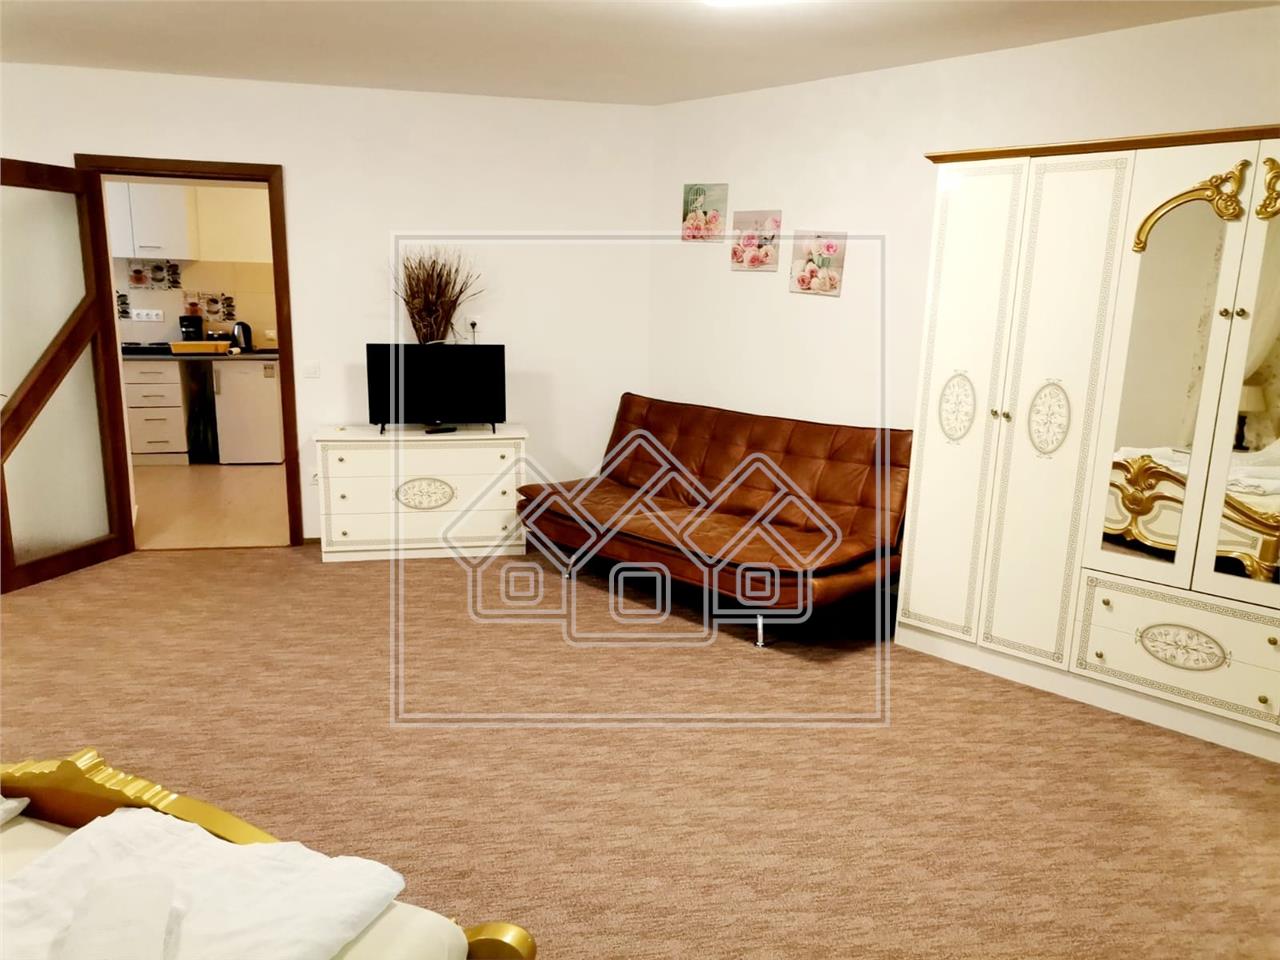 Studio for rent in Sibiu - 1 room - 60 usable sqm - Central Area